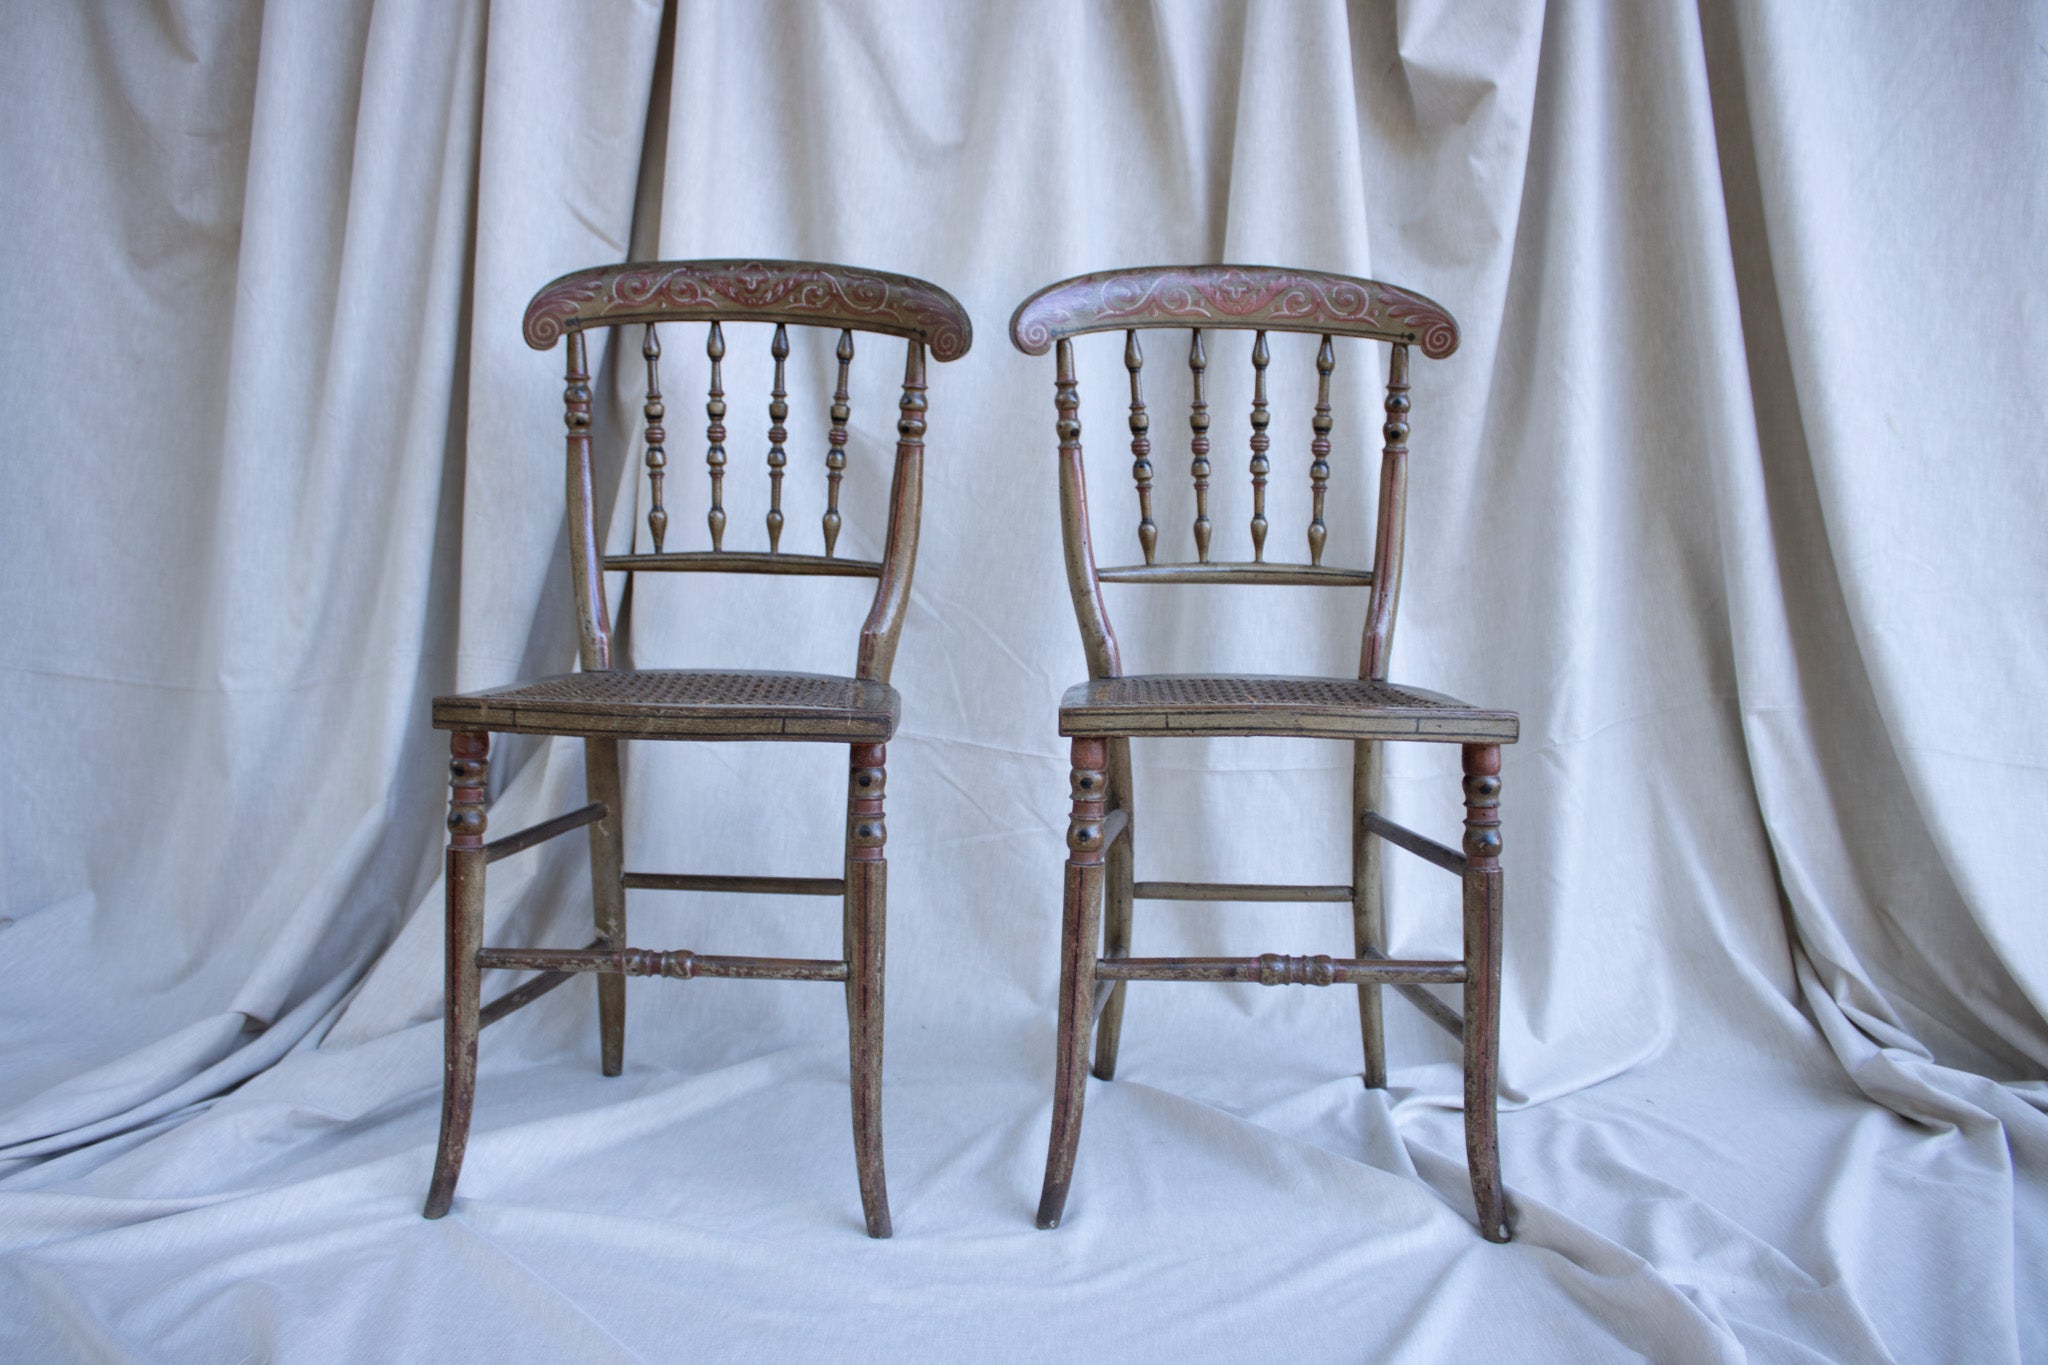 European Pair of Painted Woodwork Chairs - XIX Century - Europe For Sale